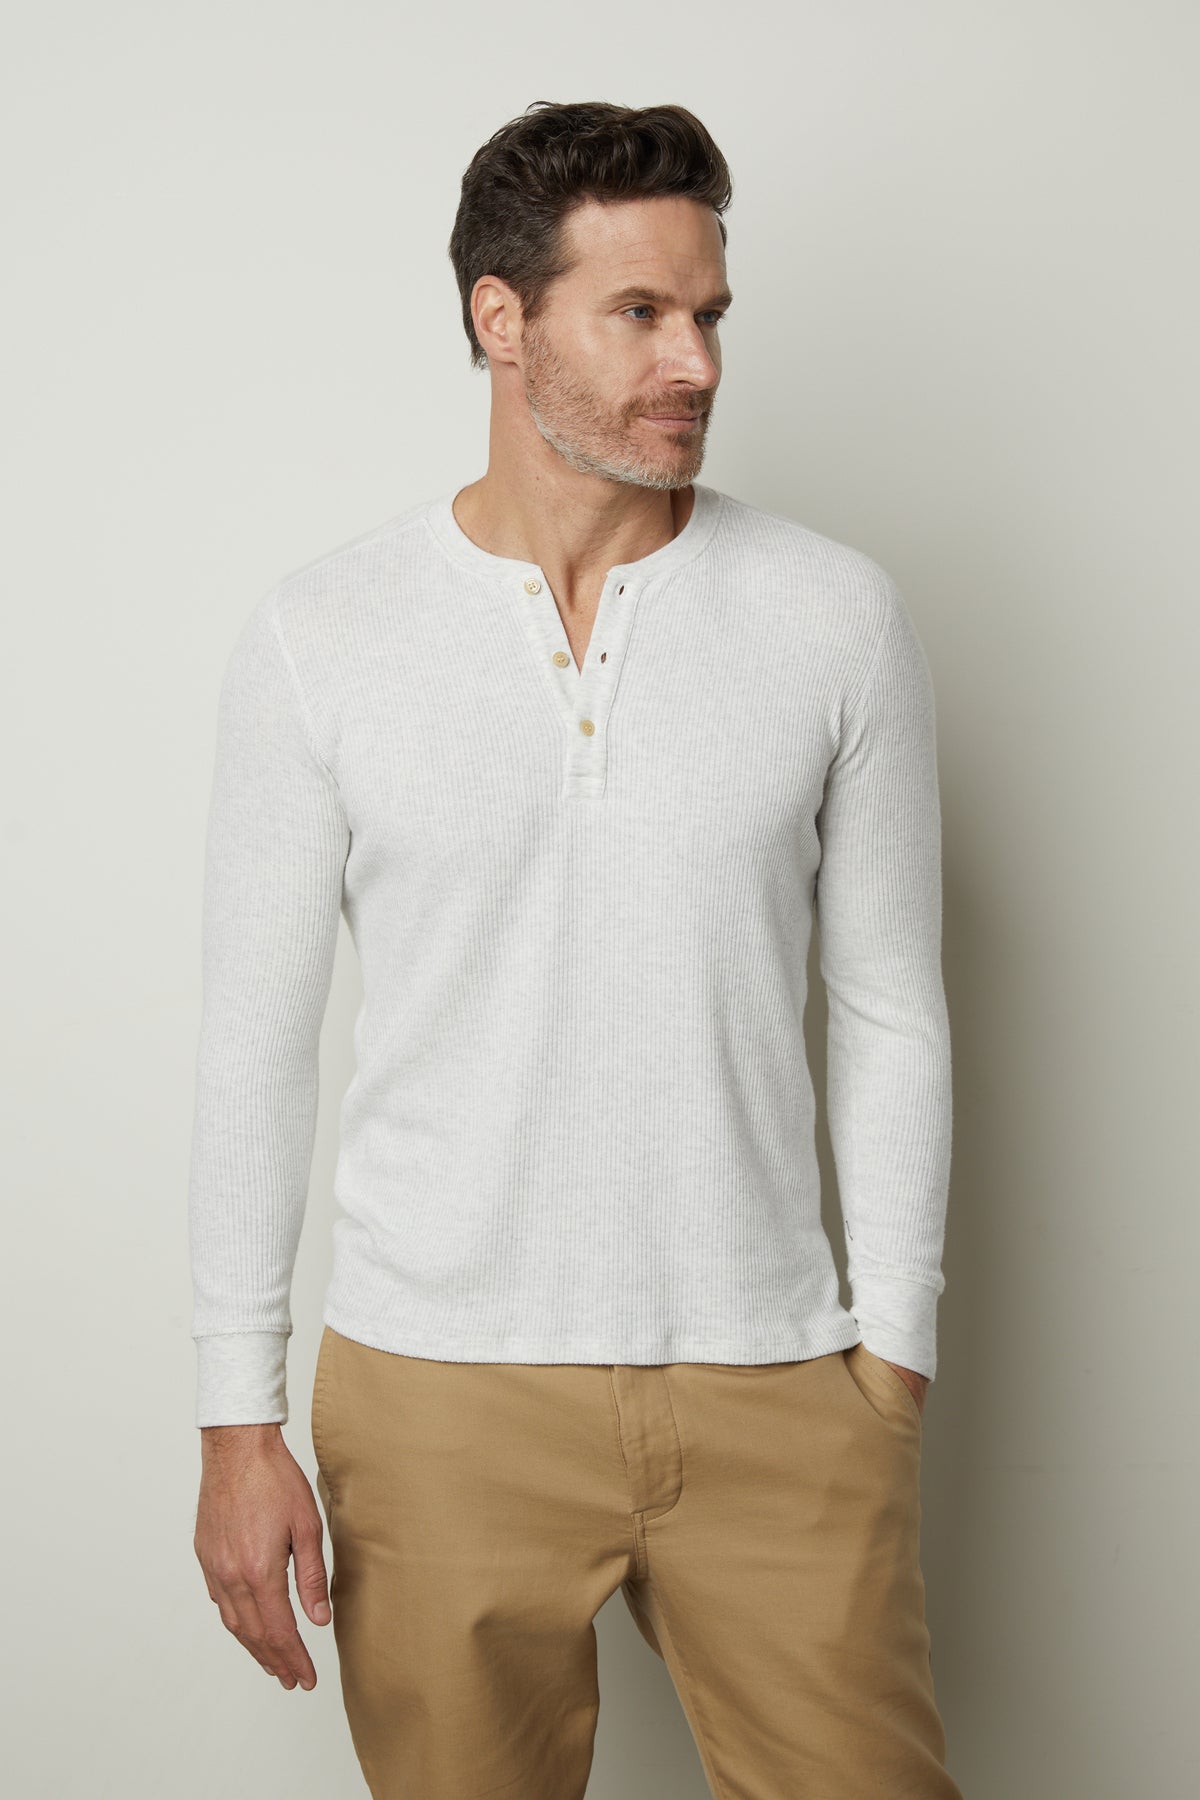 A man wearing a Velvet by Graham & Spencer Anderson Rib Knit Henley shirt and khaki pants.-26827671011521